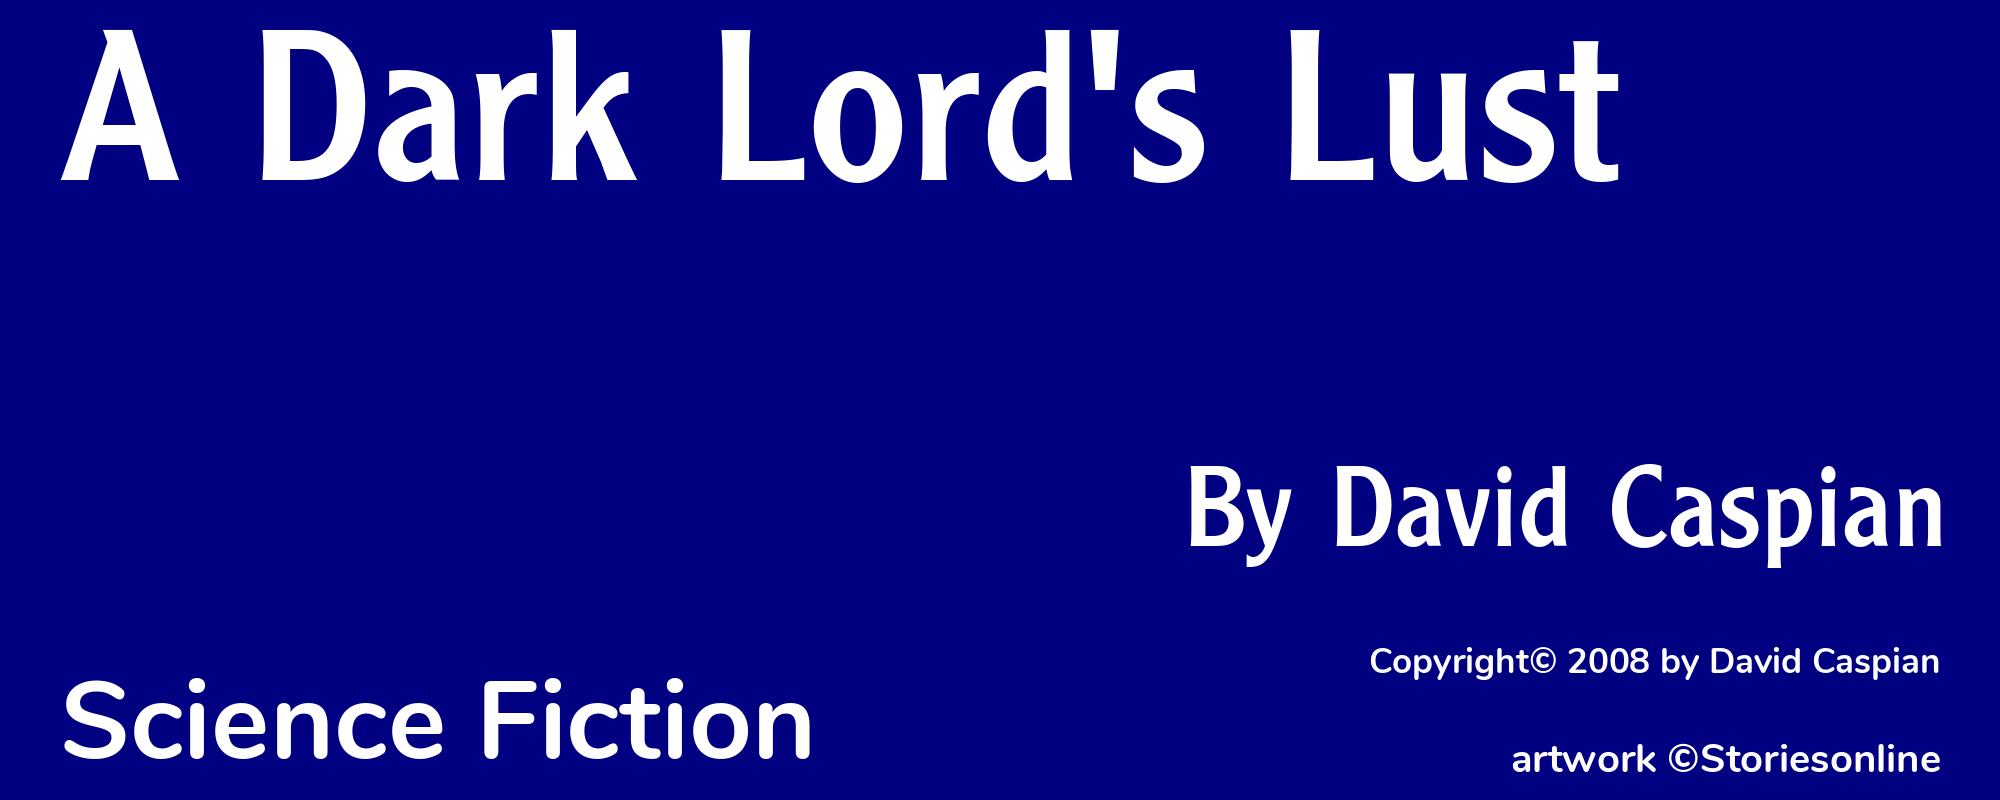 A Dark Lord's Lust - Cover